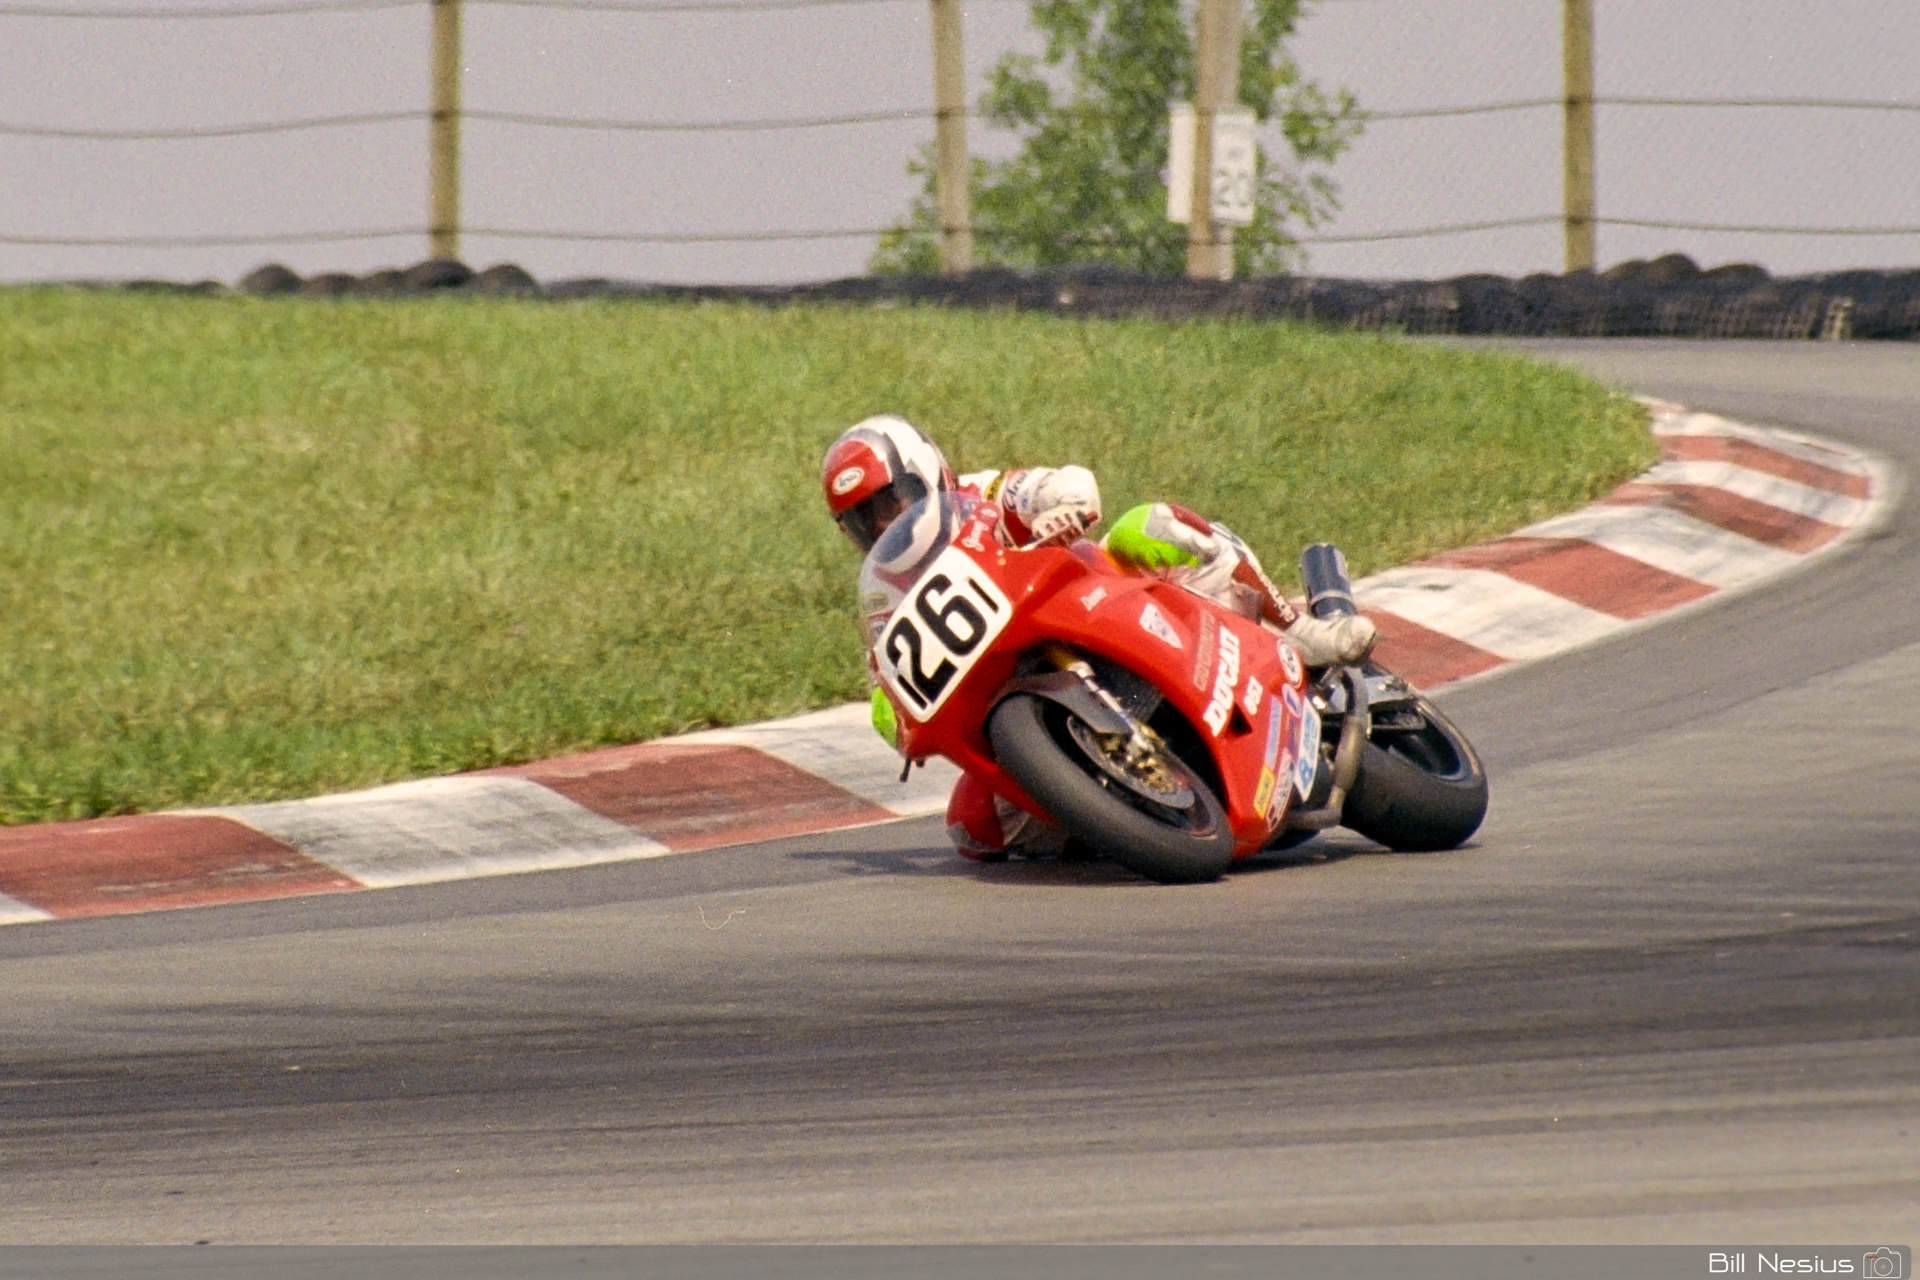 Jimmy Adamo on a the Number 26 Ducati 851 / FLM_7777 / 